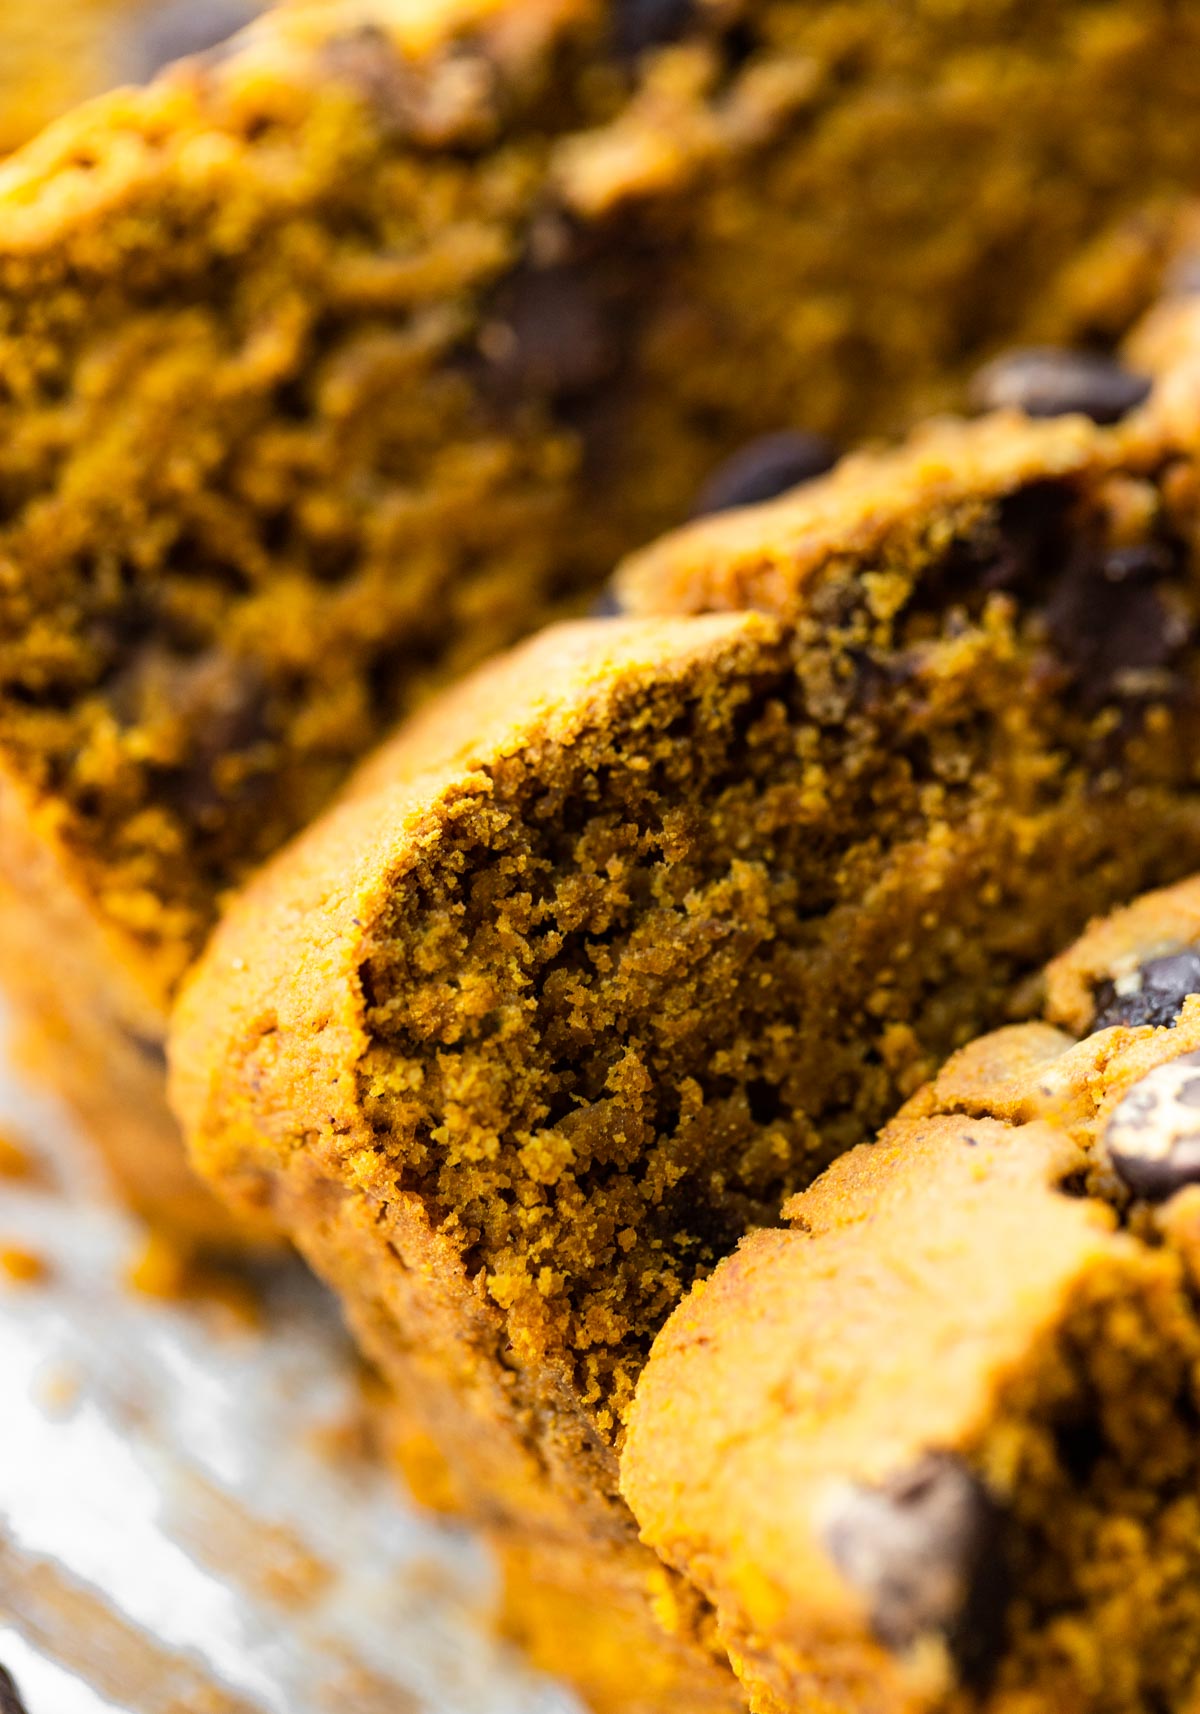 Up close photo of slices of vegan gluten free pumpkin bread topped with chocolate chips.